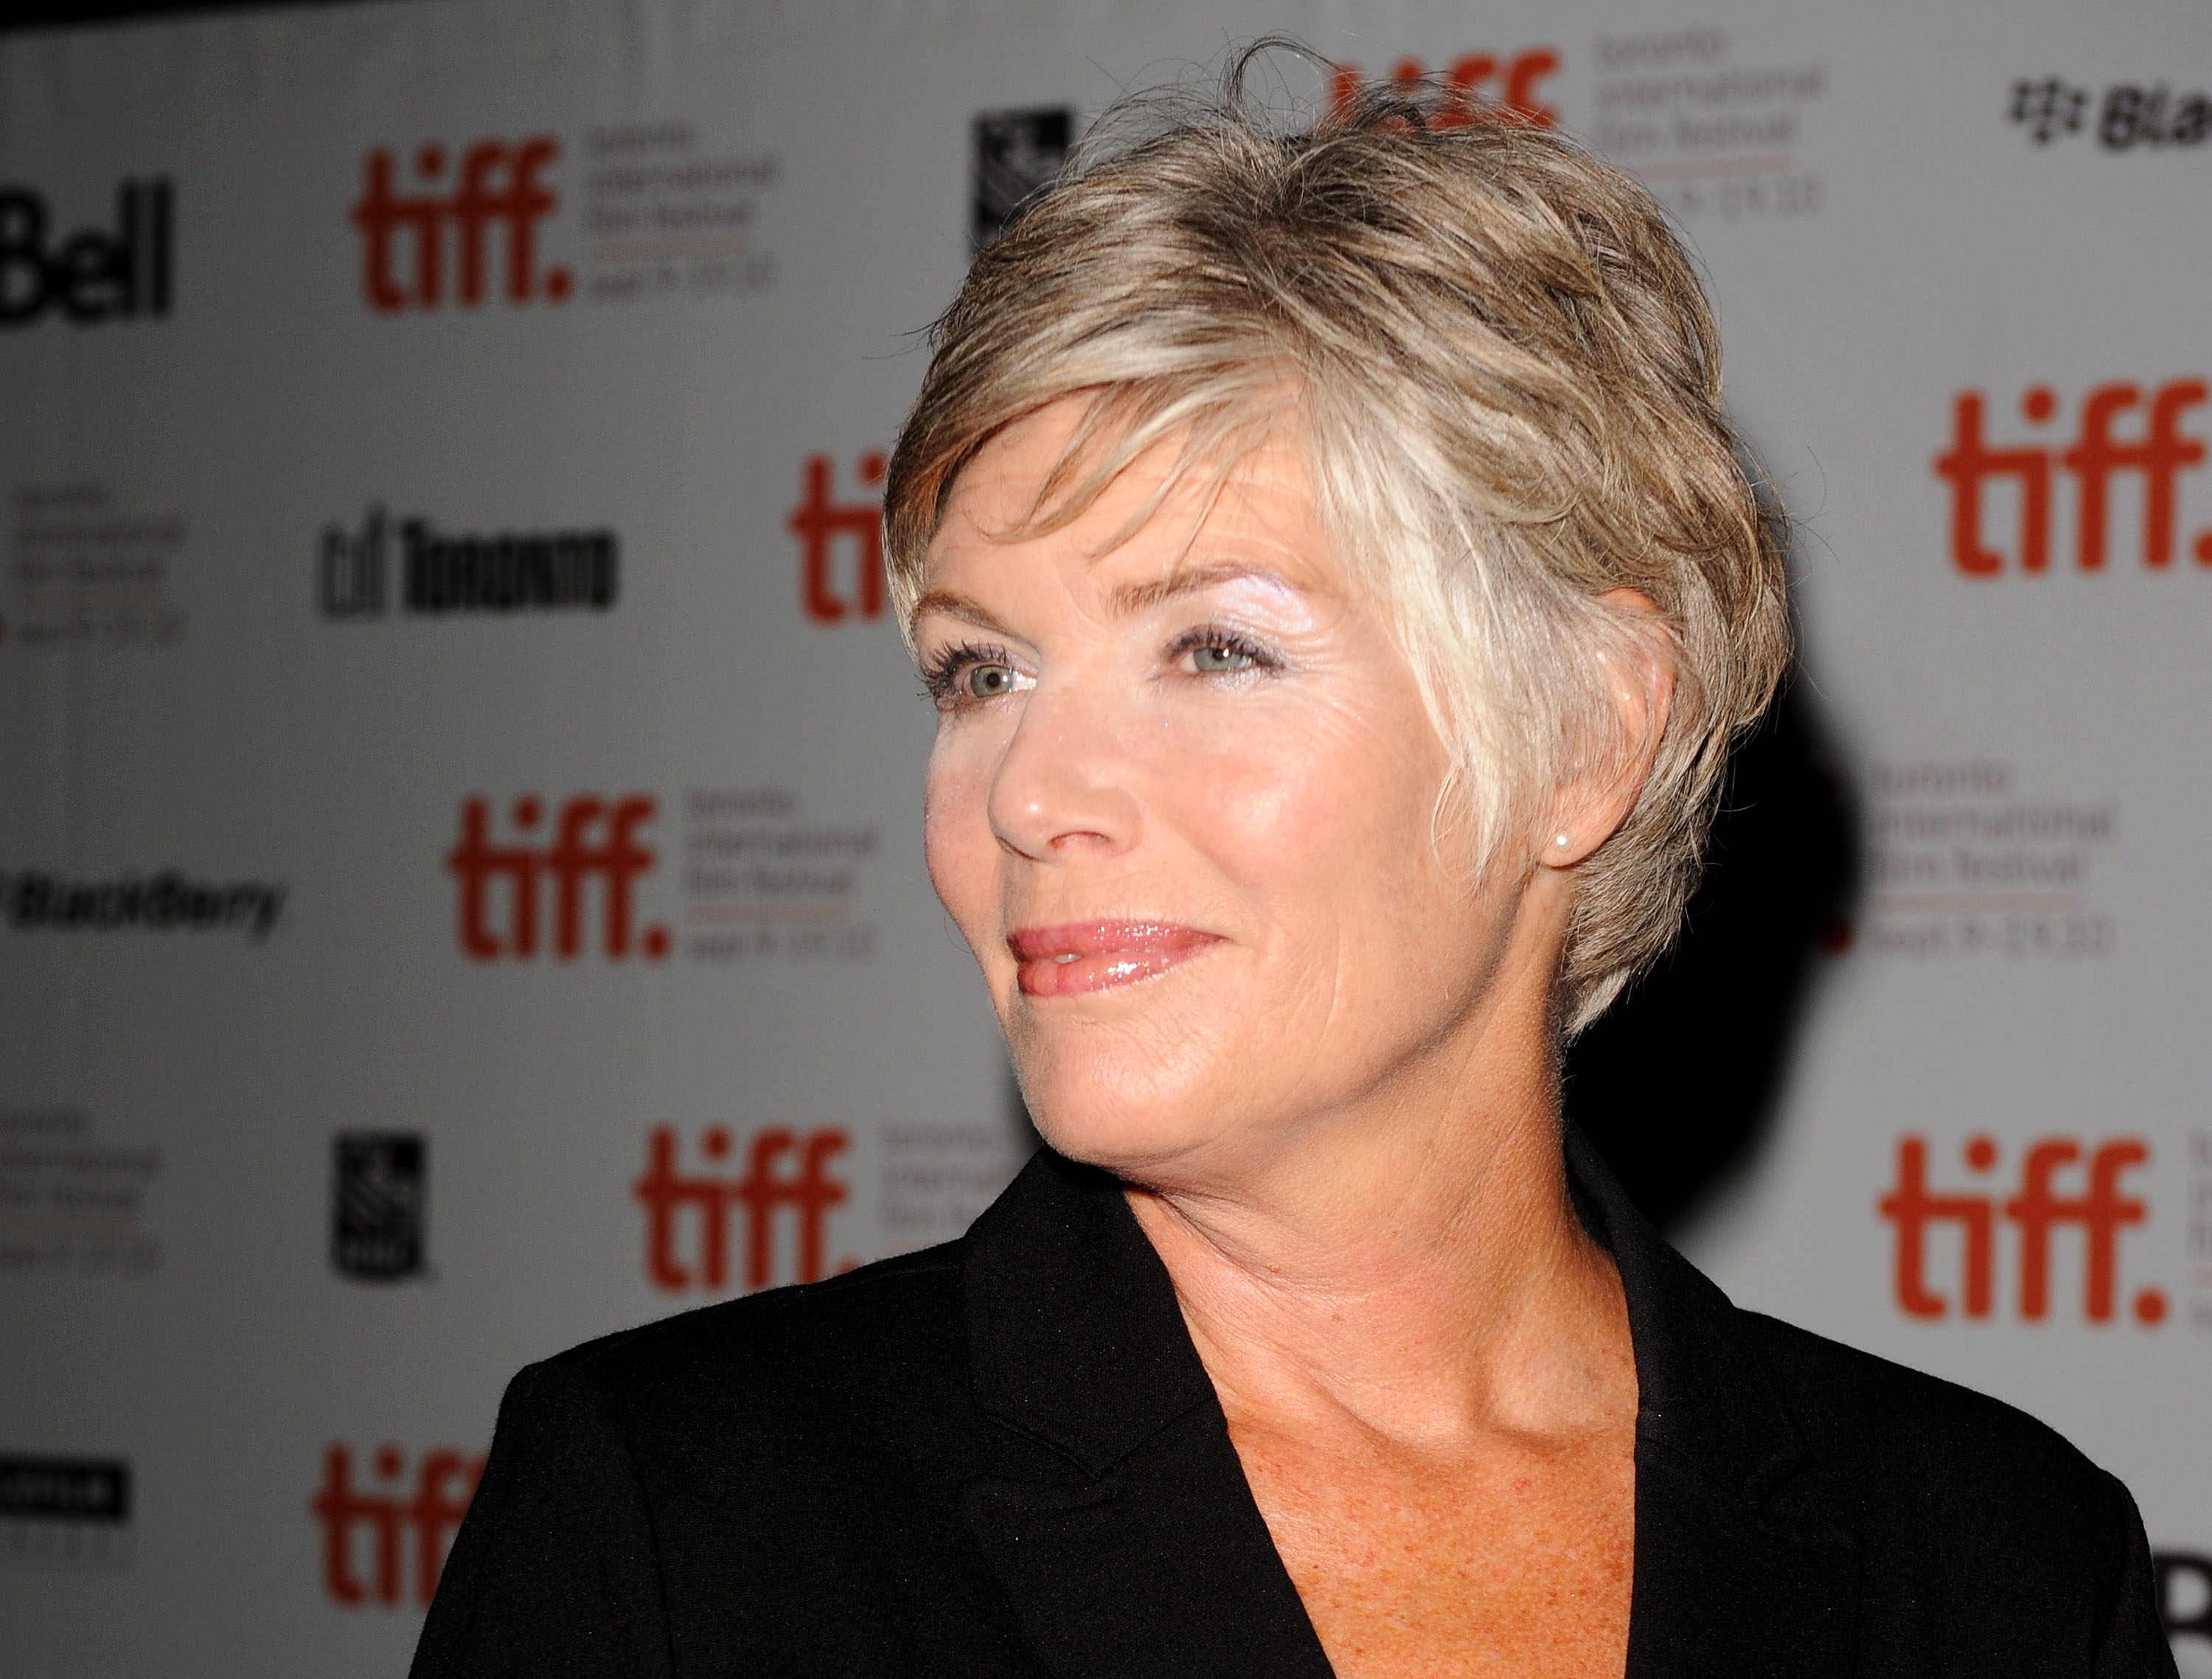 Kelly McGillis in Toronto, Canada on September 17, 2010 | Source: Getty Images